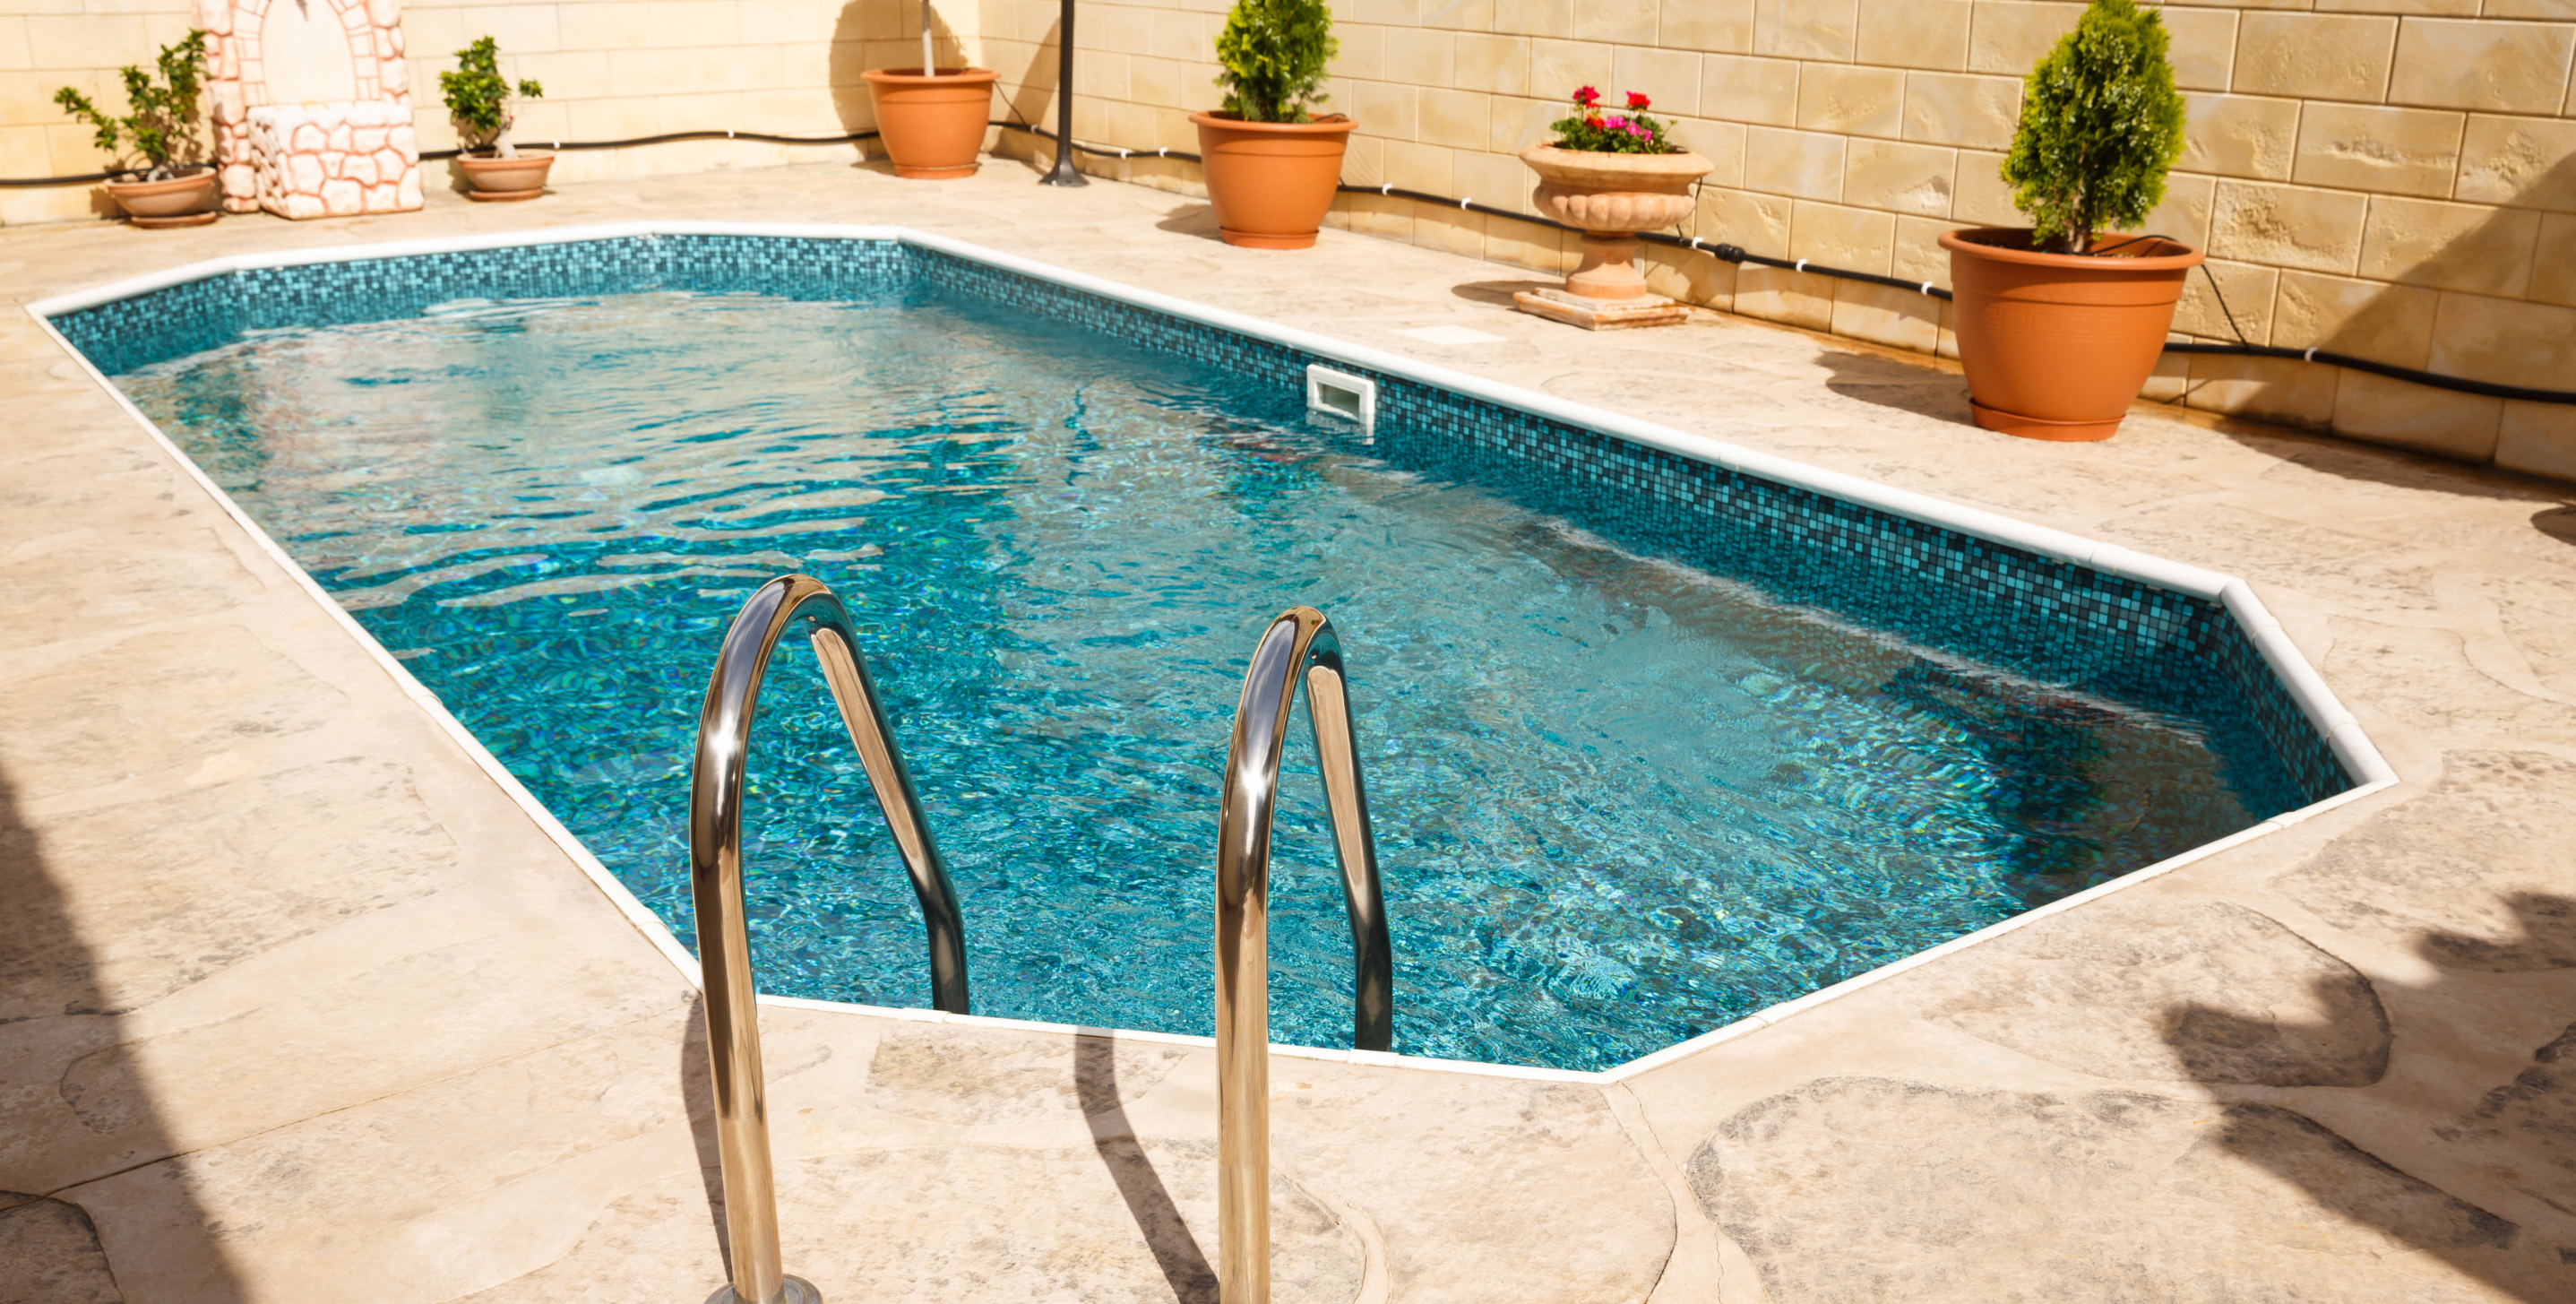 Simplify Your Life with McCallum's Weekly Pool Service Plan